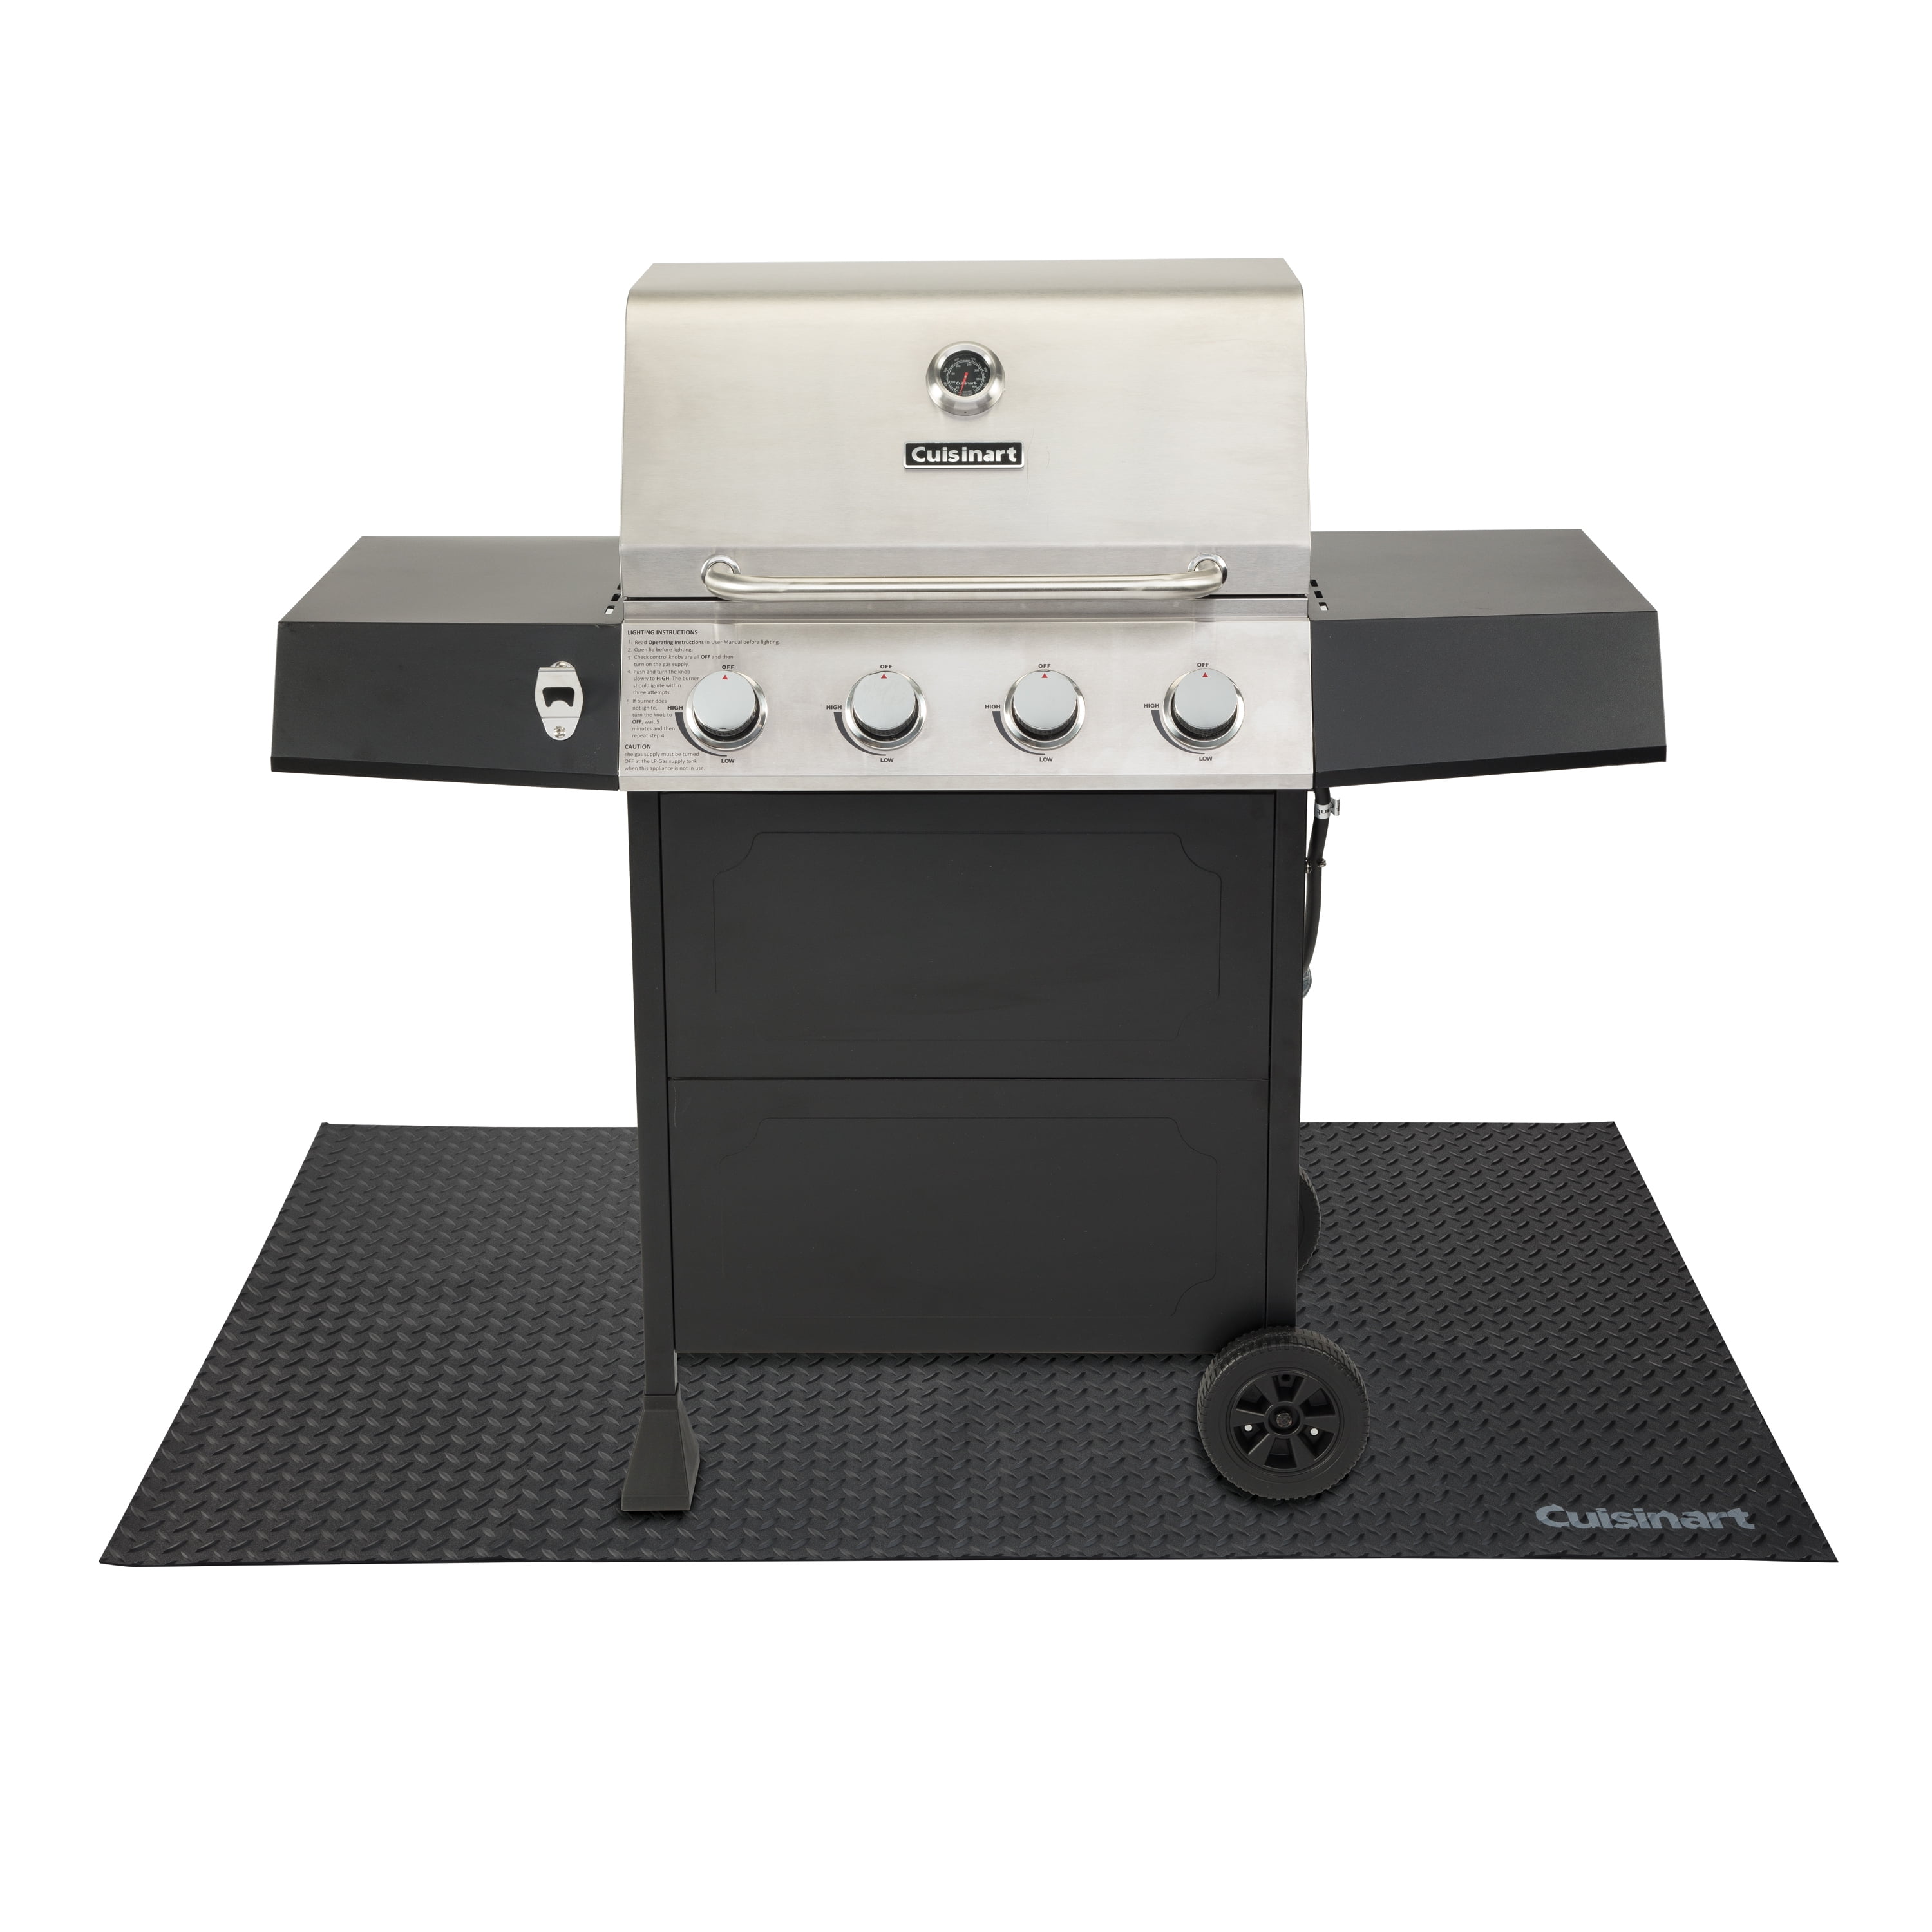 Cuisinart 30 in. Premium Deck and Patio Grill Mat CGMT-140 - The